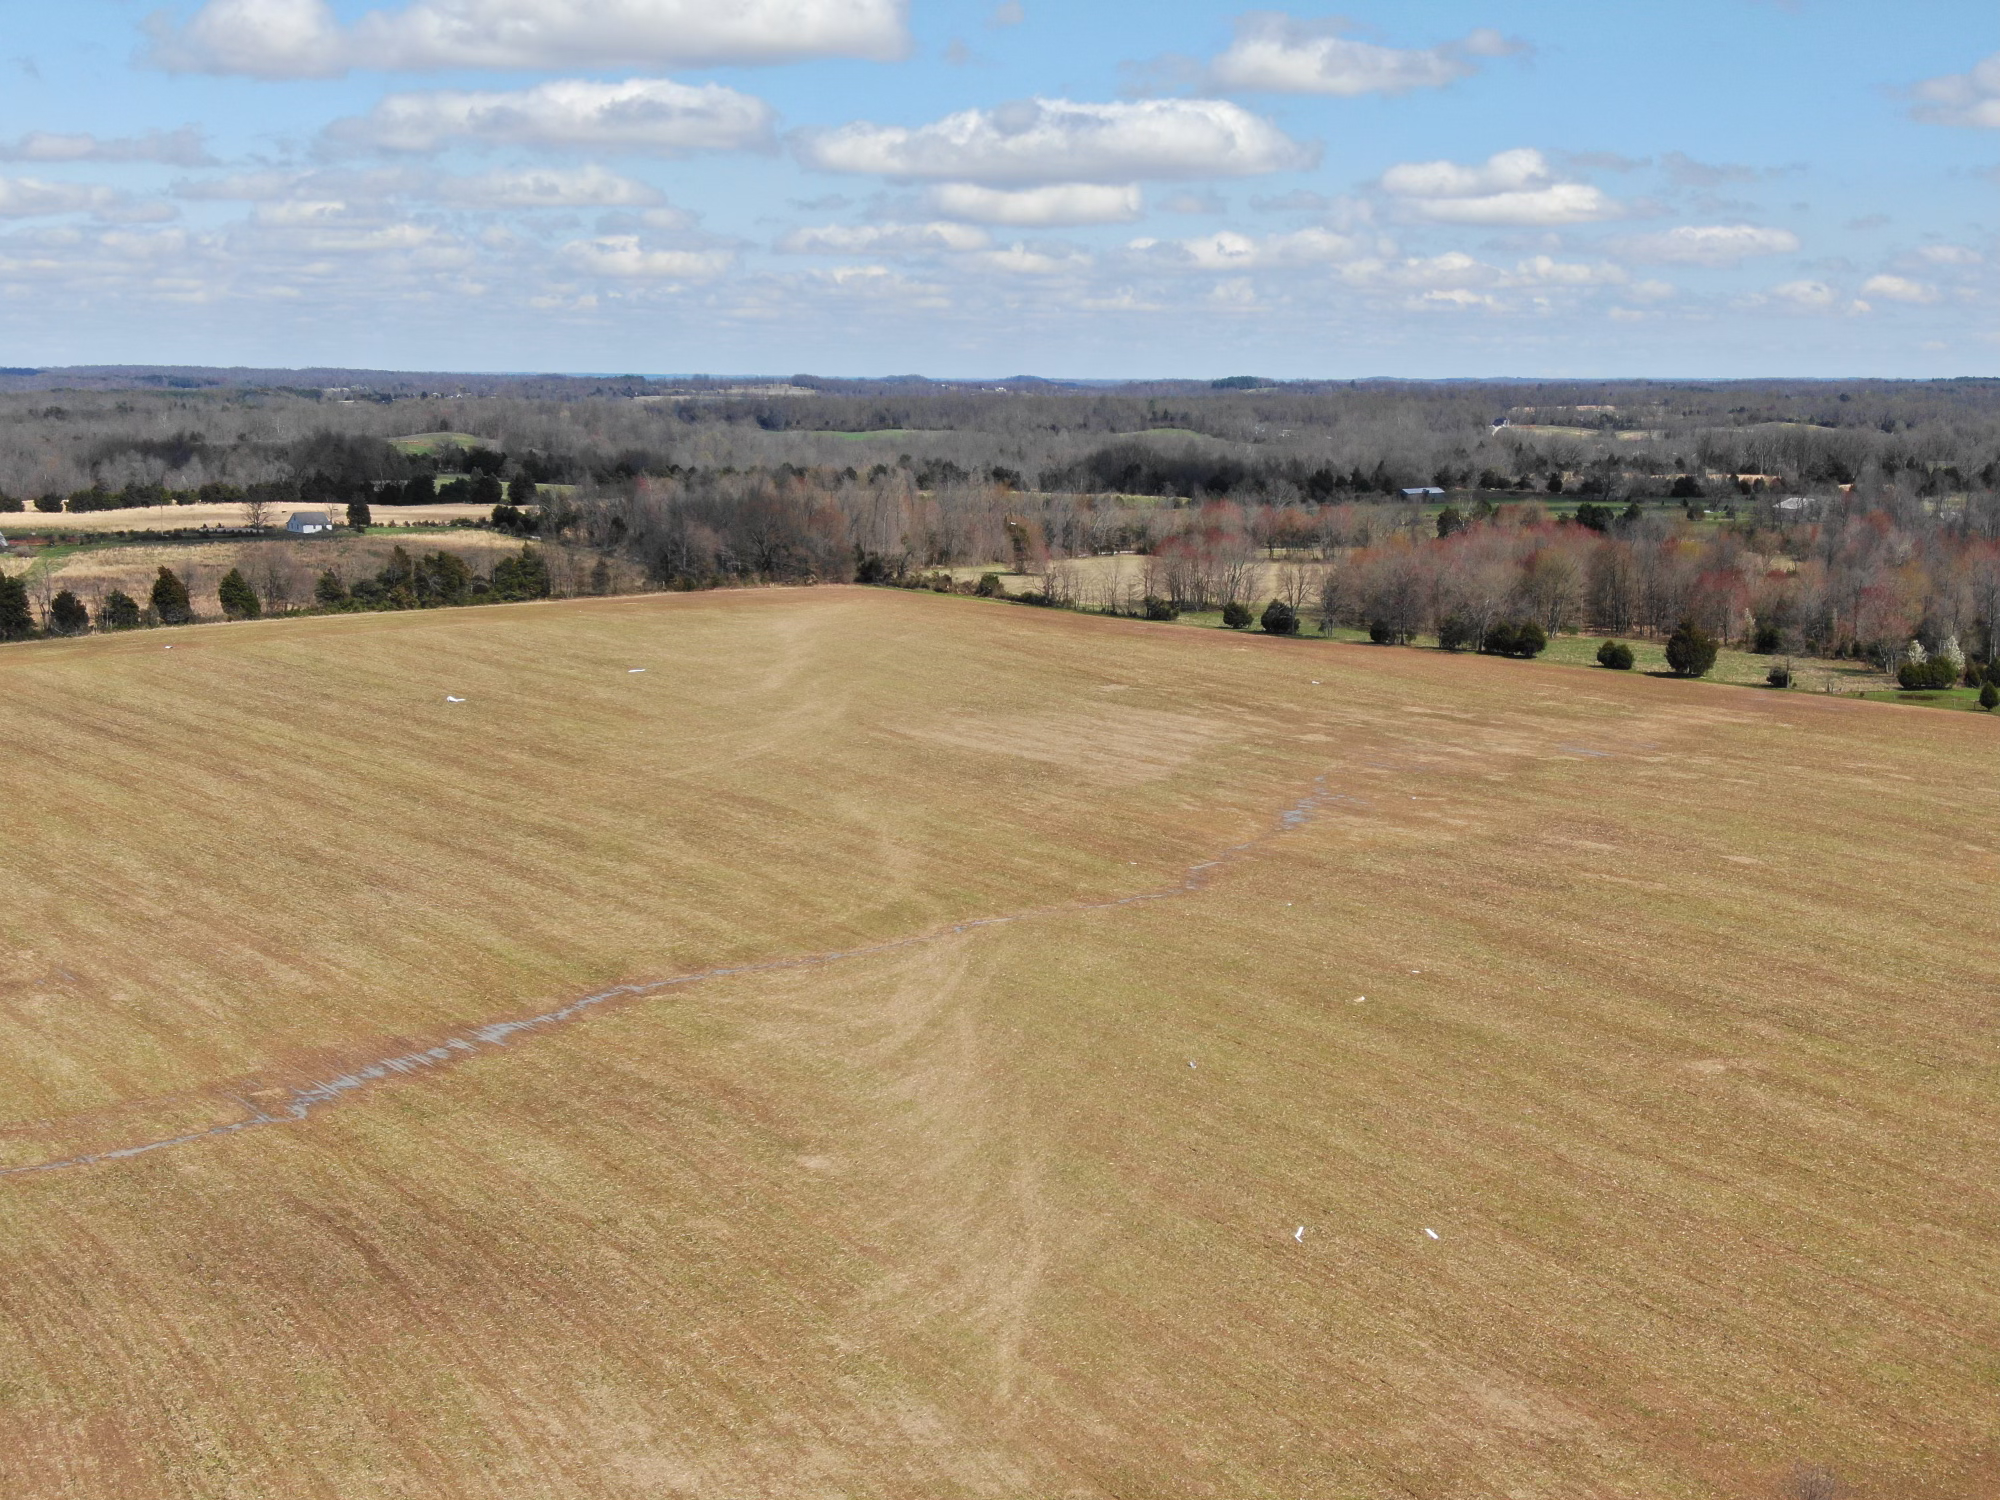 Ground scar in Grayson County, KY from an EF-0 tornado March 25, 2021